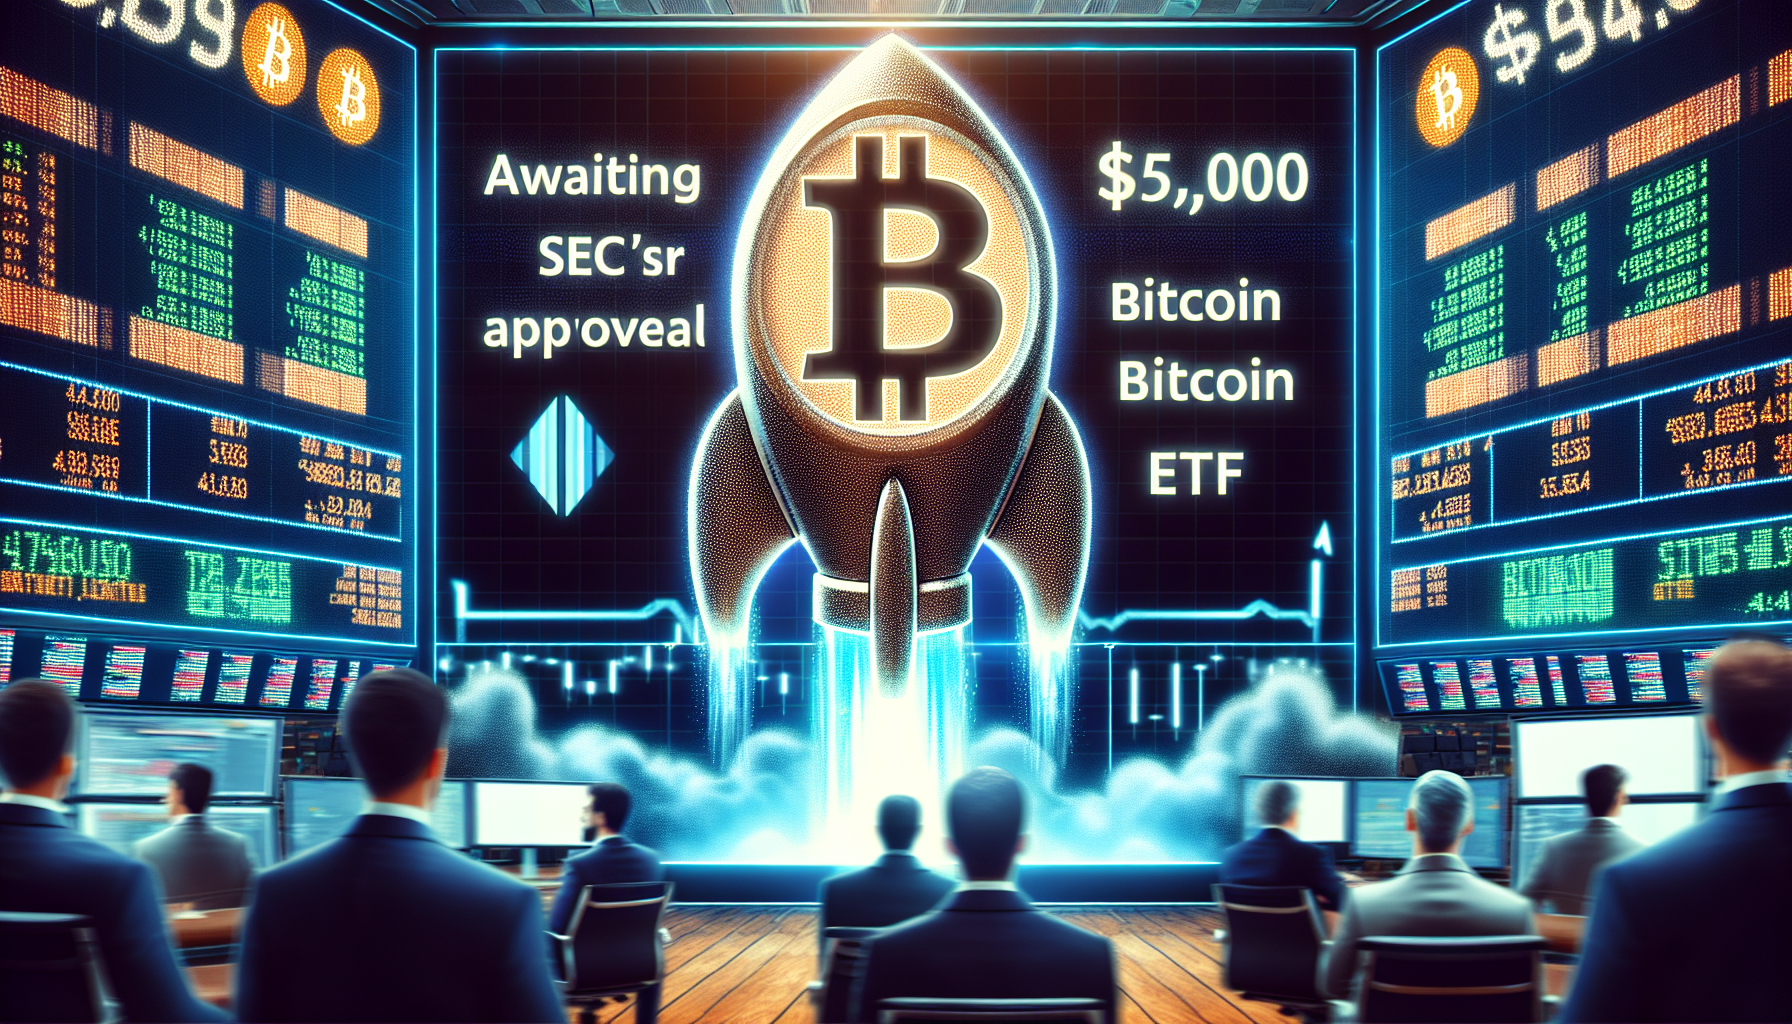 Bitcoin Price Soars to $45,000 Awaiting SEC's Approval for Bitcoin ETF